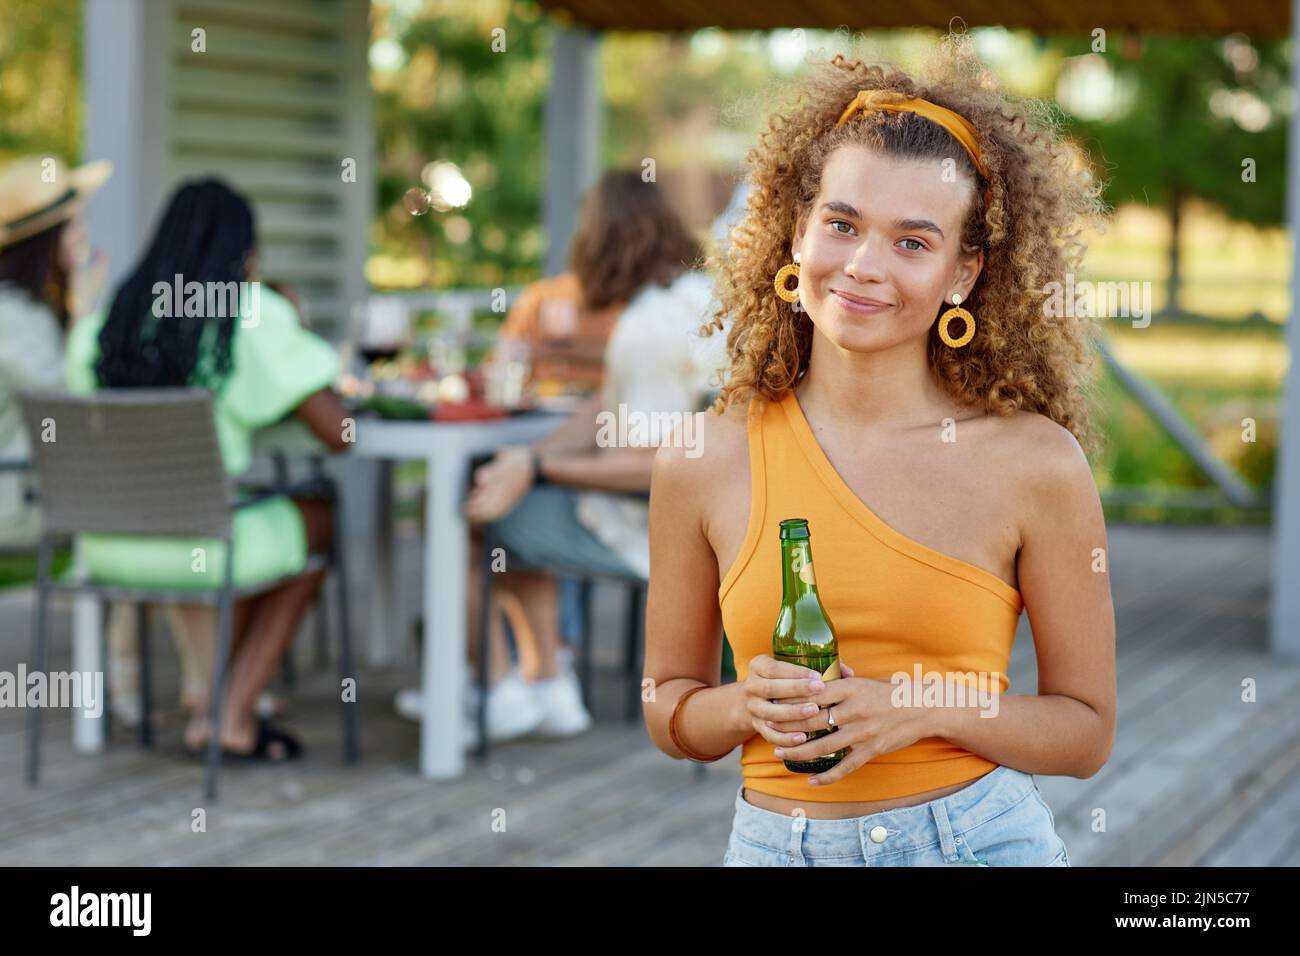 Waist up portrait of curly haired young woman smiling at camera and holding drink during outdoor party with friends in Summer, copy space Stock Photo